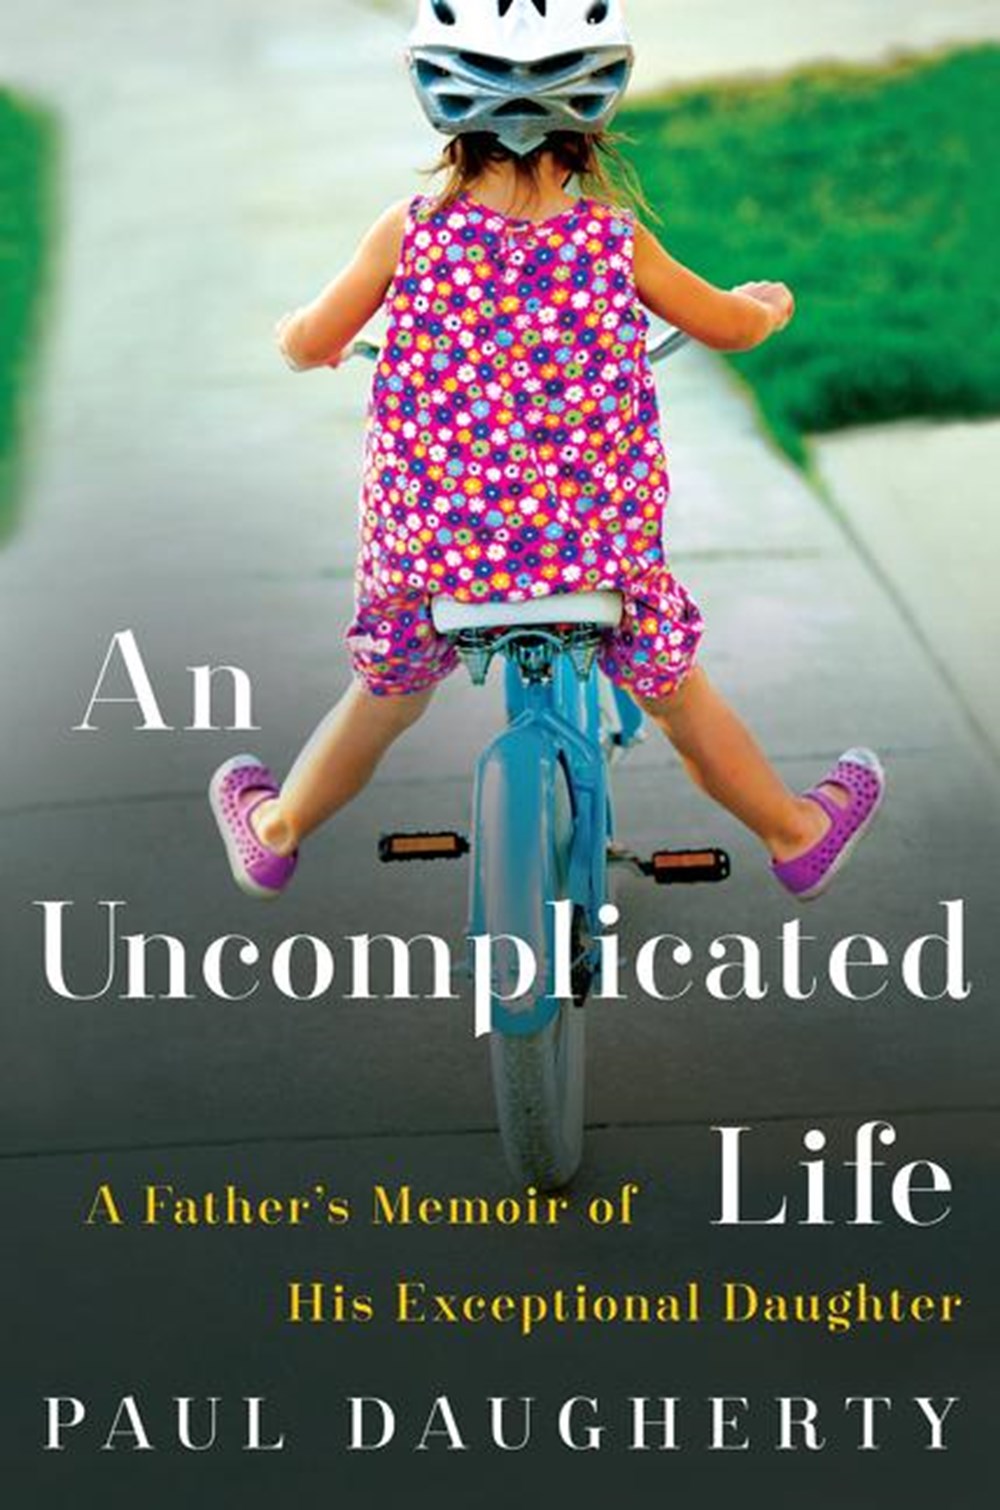 Uncomplicated Life: A Father's Memoir of His Exceptional Daughter